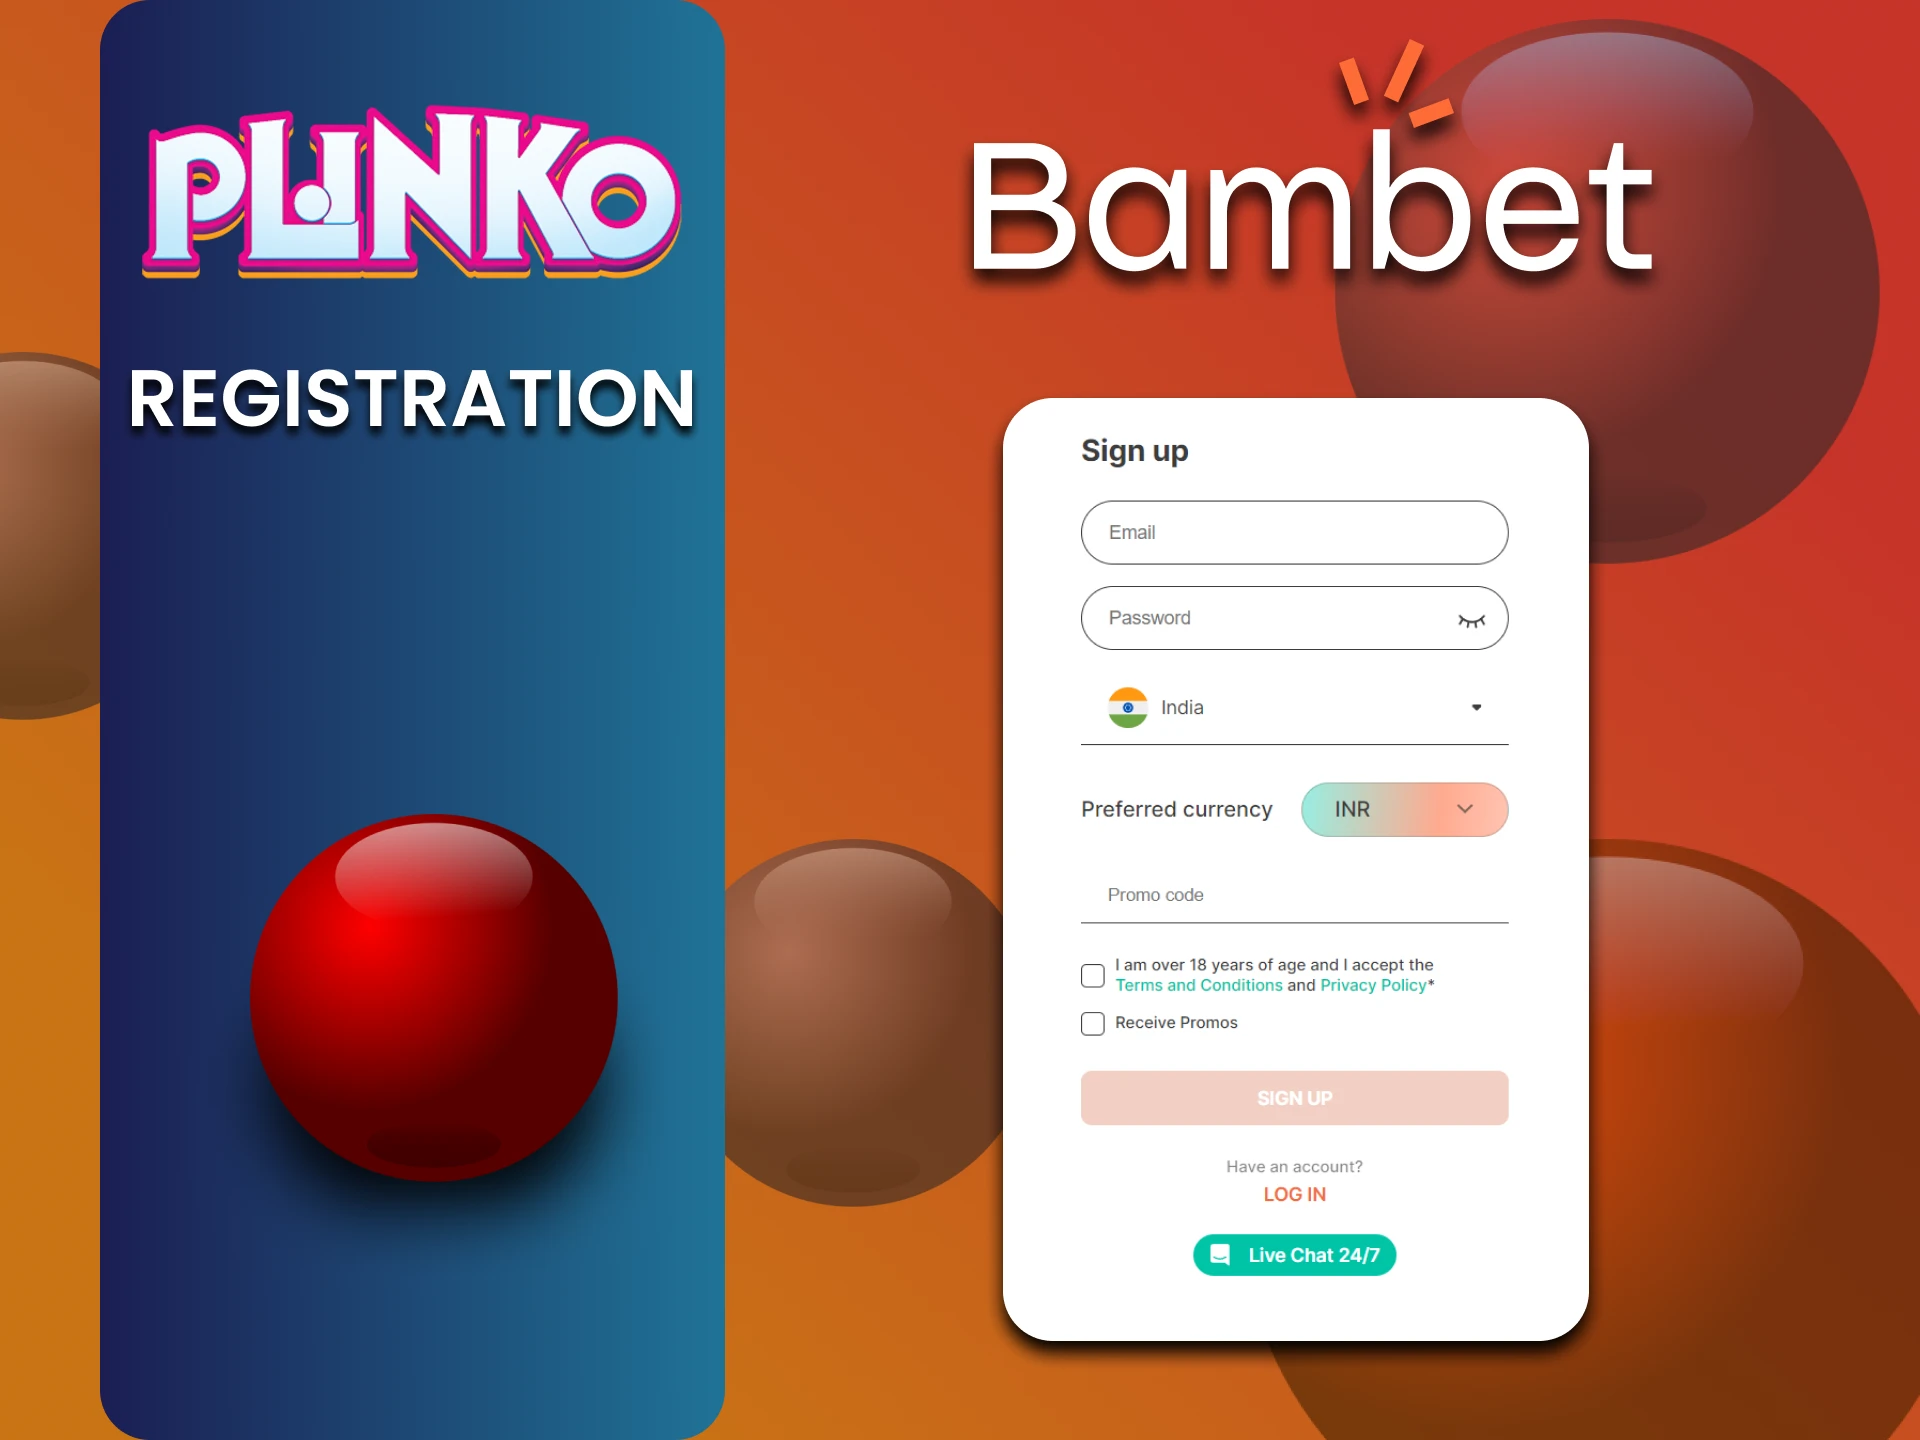 Simply and quickly register at Bambet website to play Plinko.